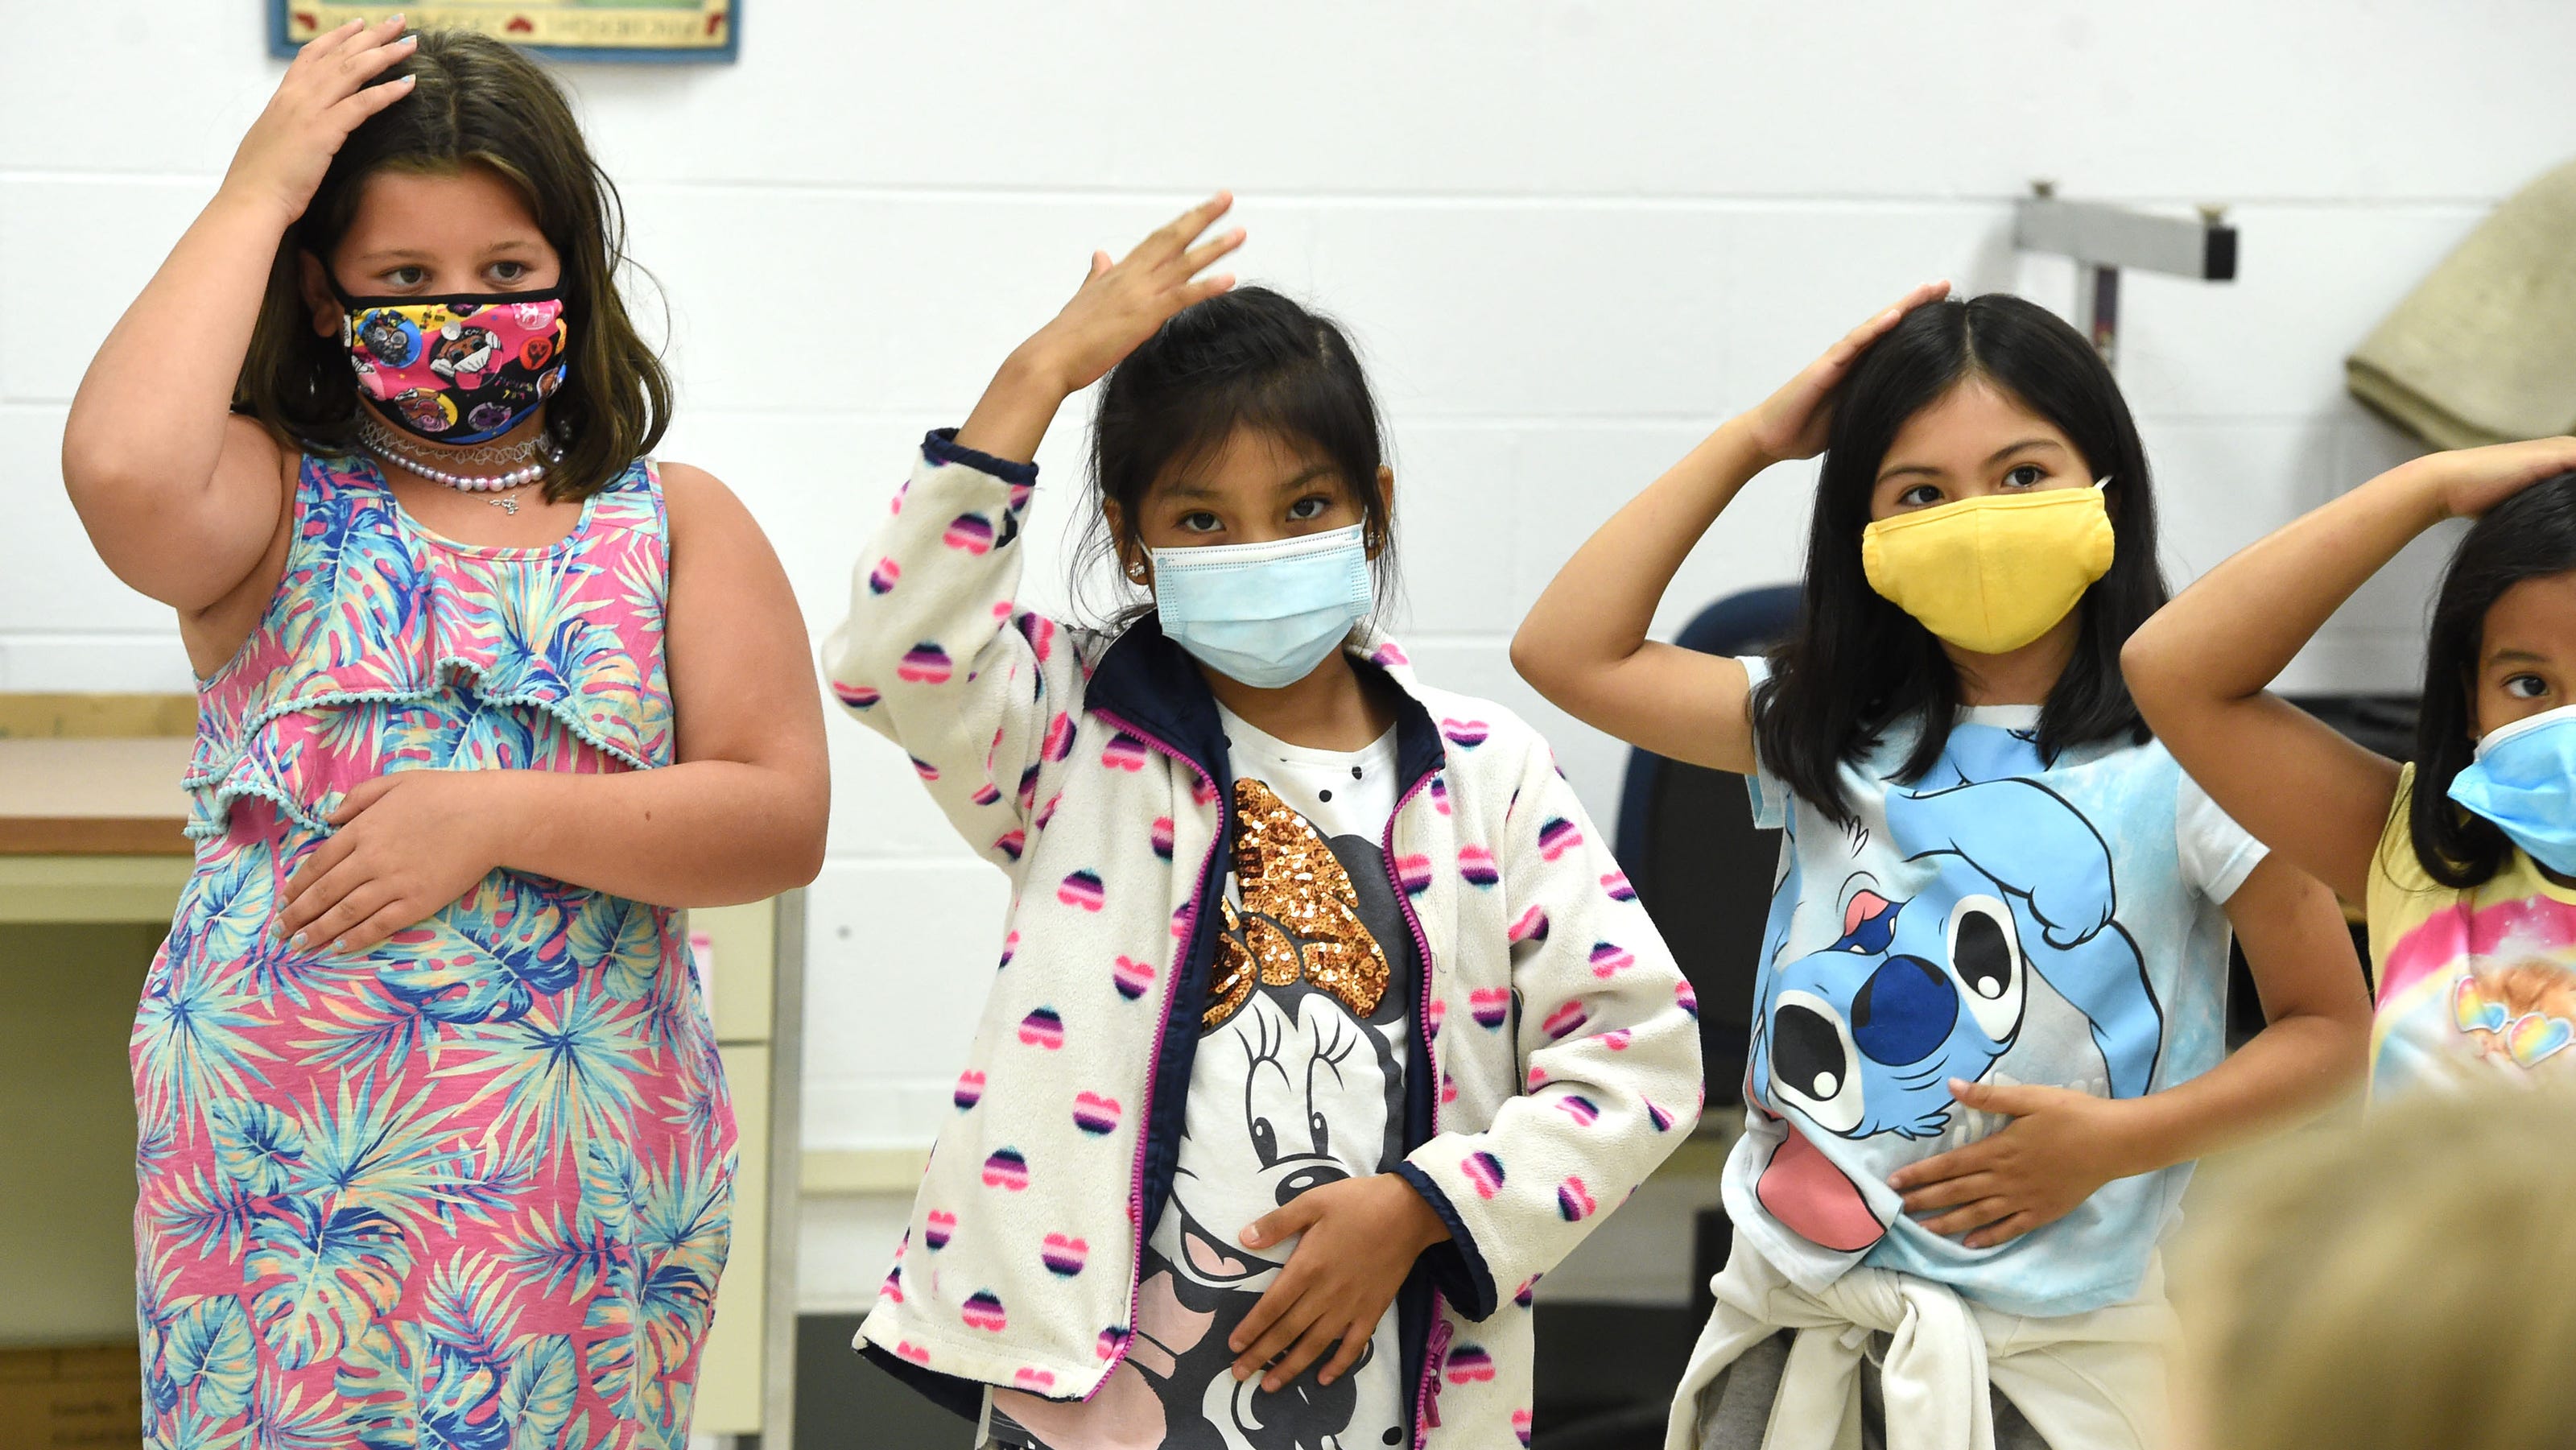 waynesboro-schools-vote-to-enforce-mask-wearing-for-some-students-to